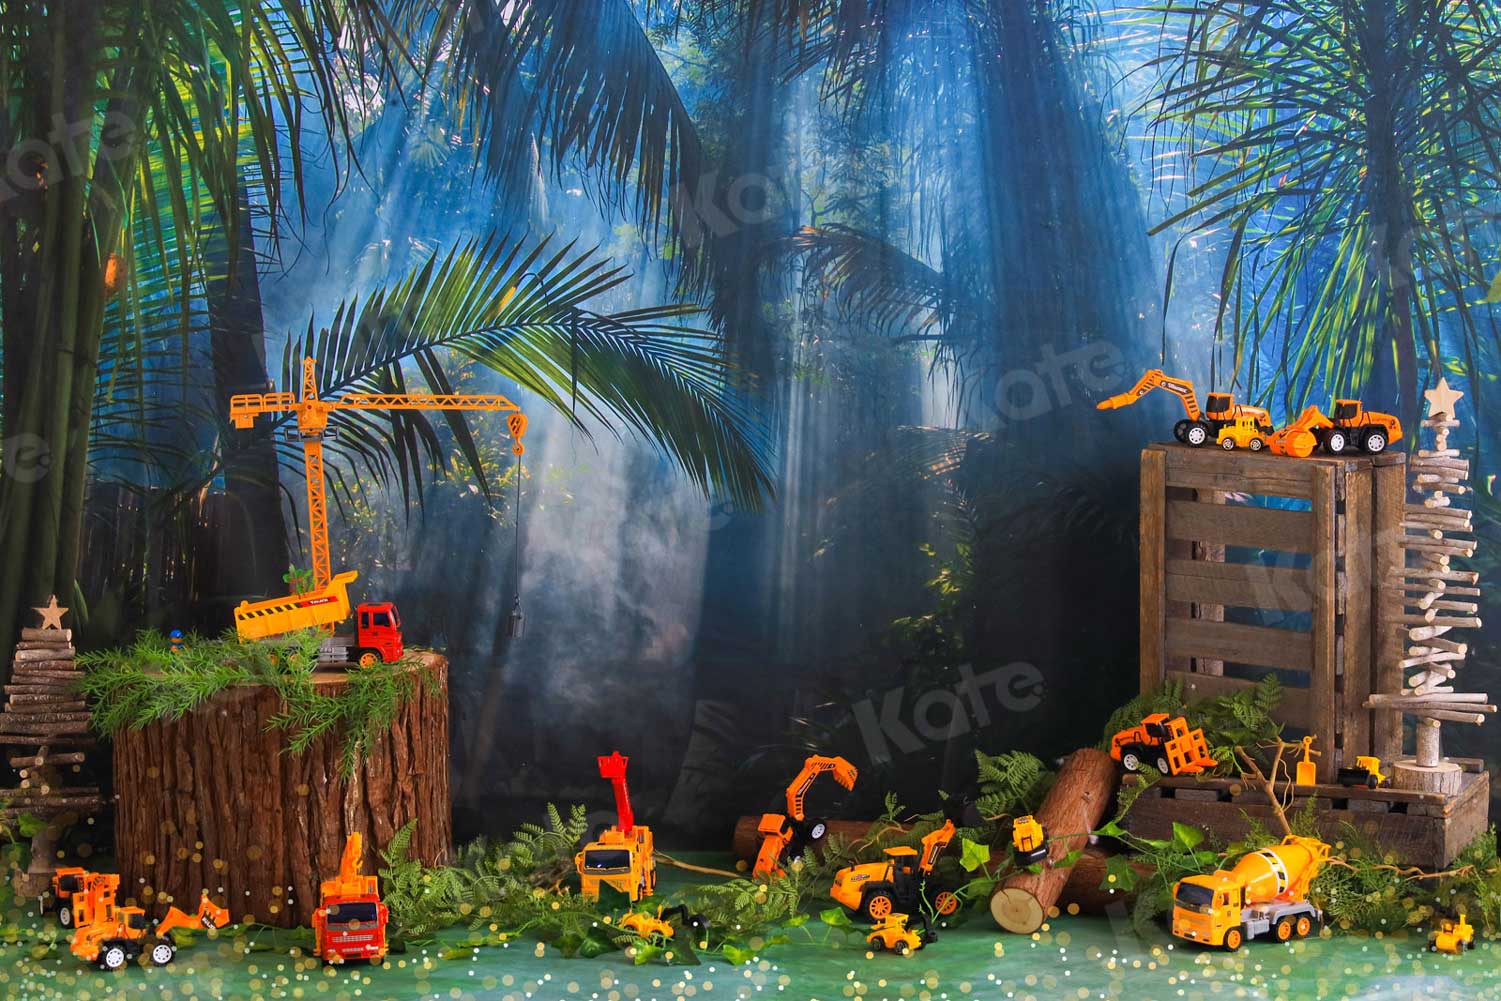 Kate Jungle Forest Backdrop Toy Car Construction for Photography